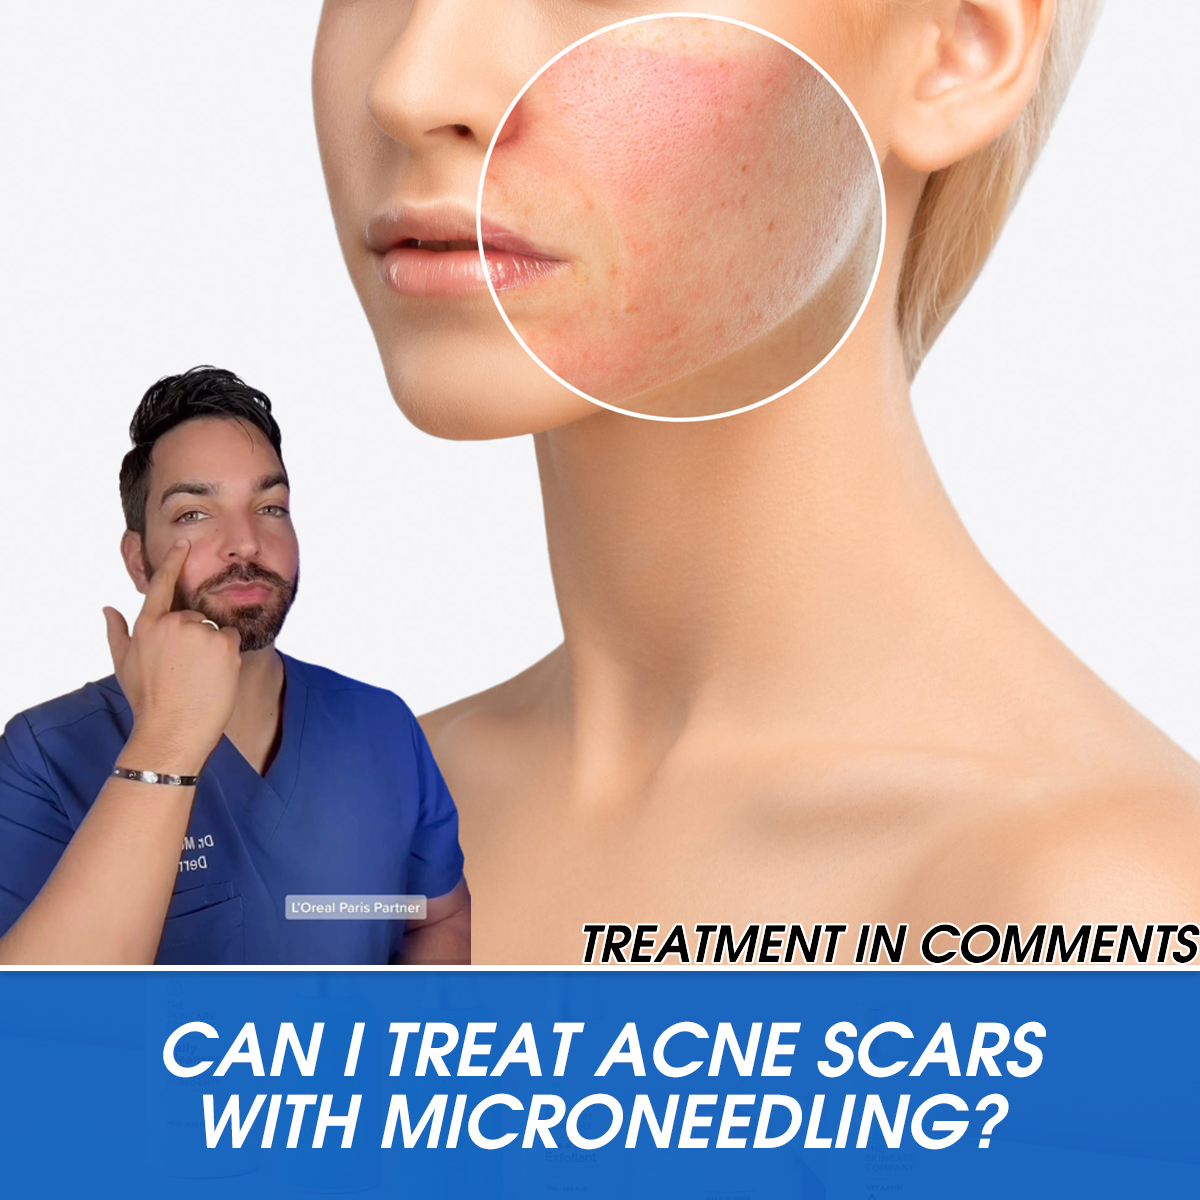 Can I Treat Acne Scars with Microneedling?